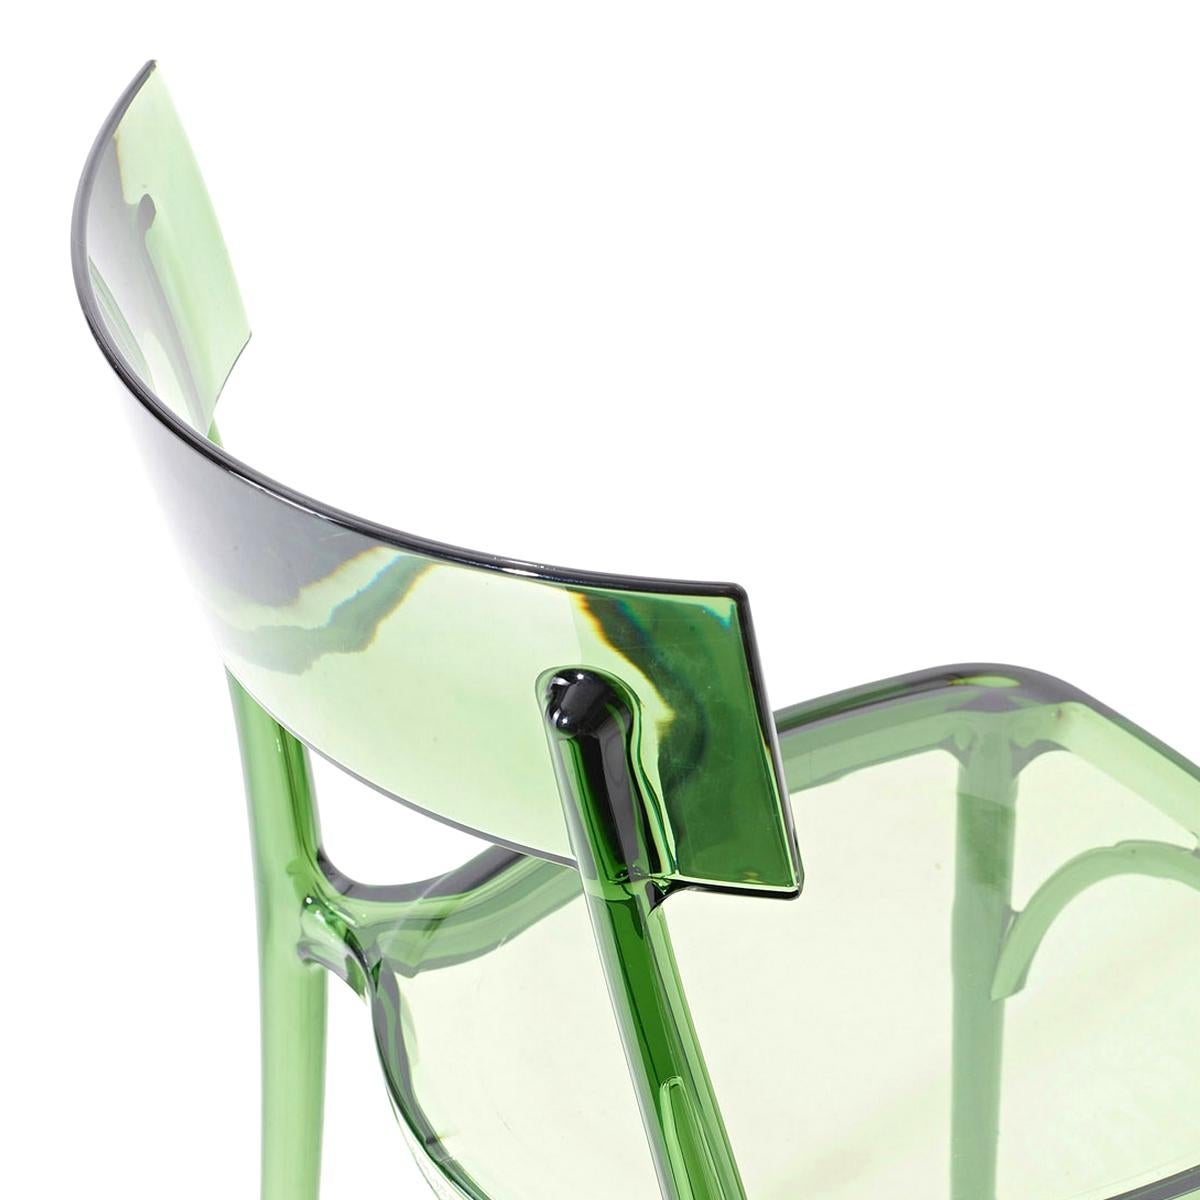 Italian In Stock in Los Angeles, Milani, Transparent Green Polycarbonate Dining Chair